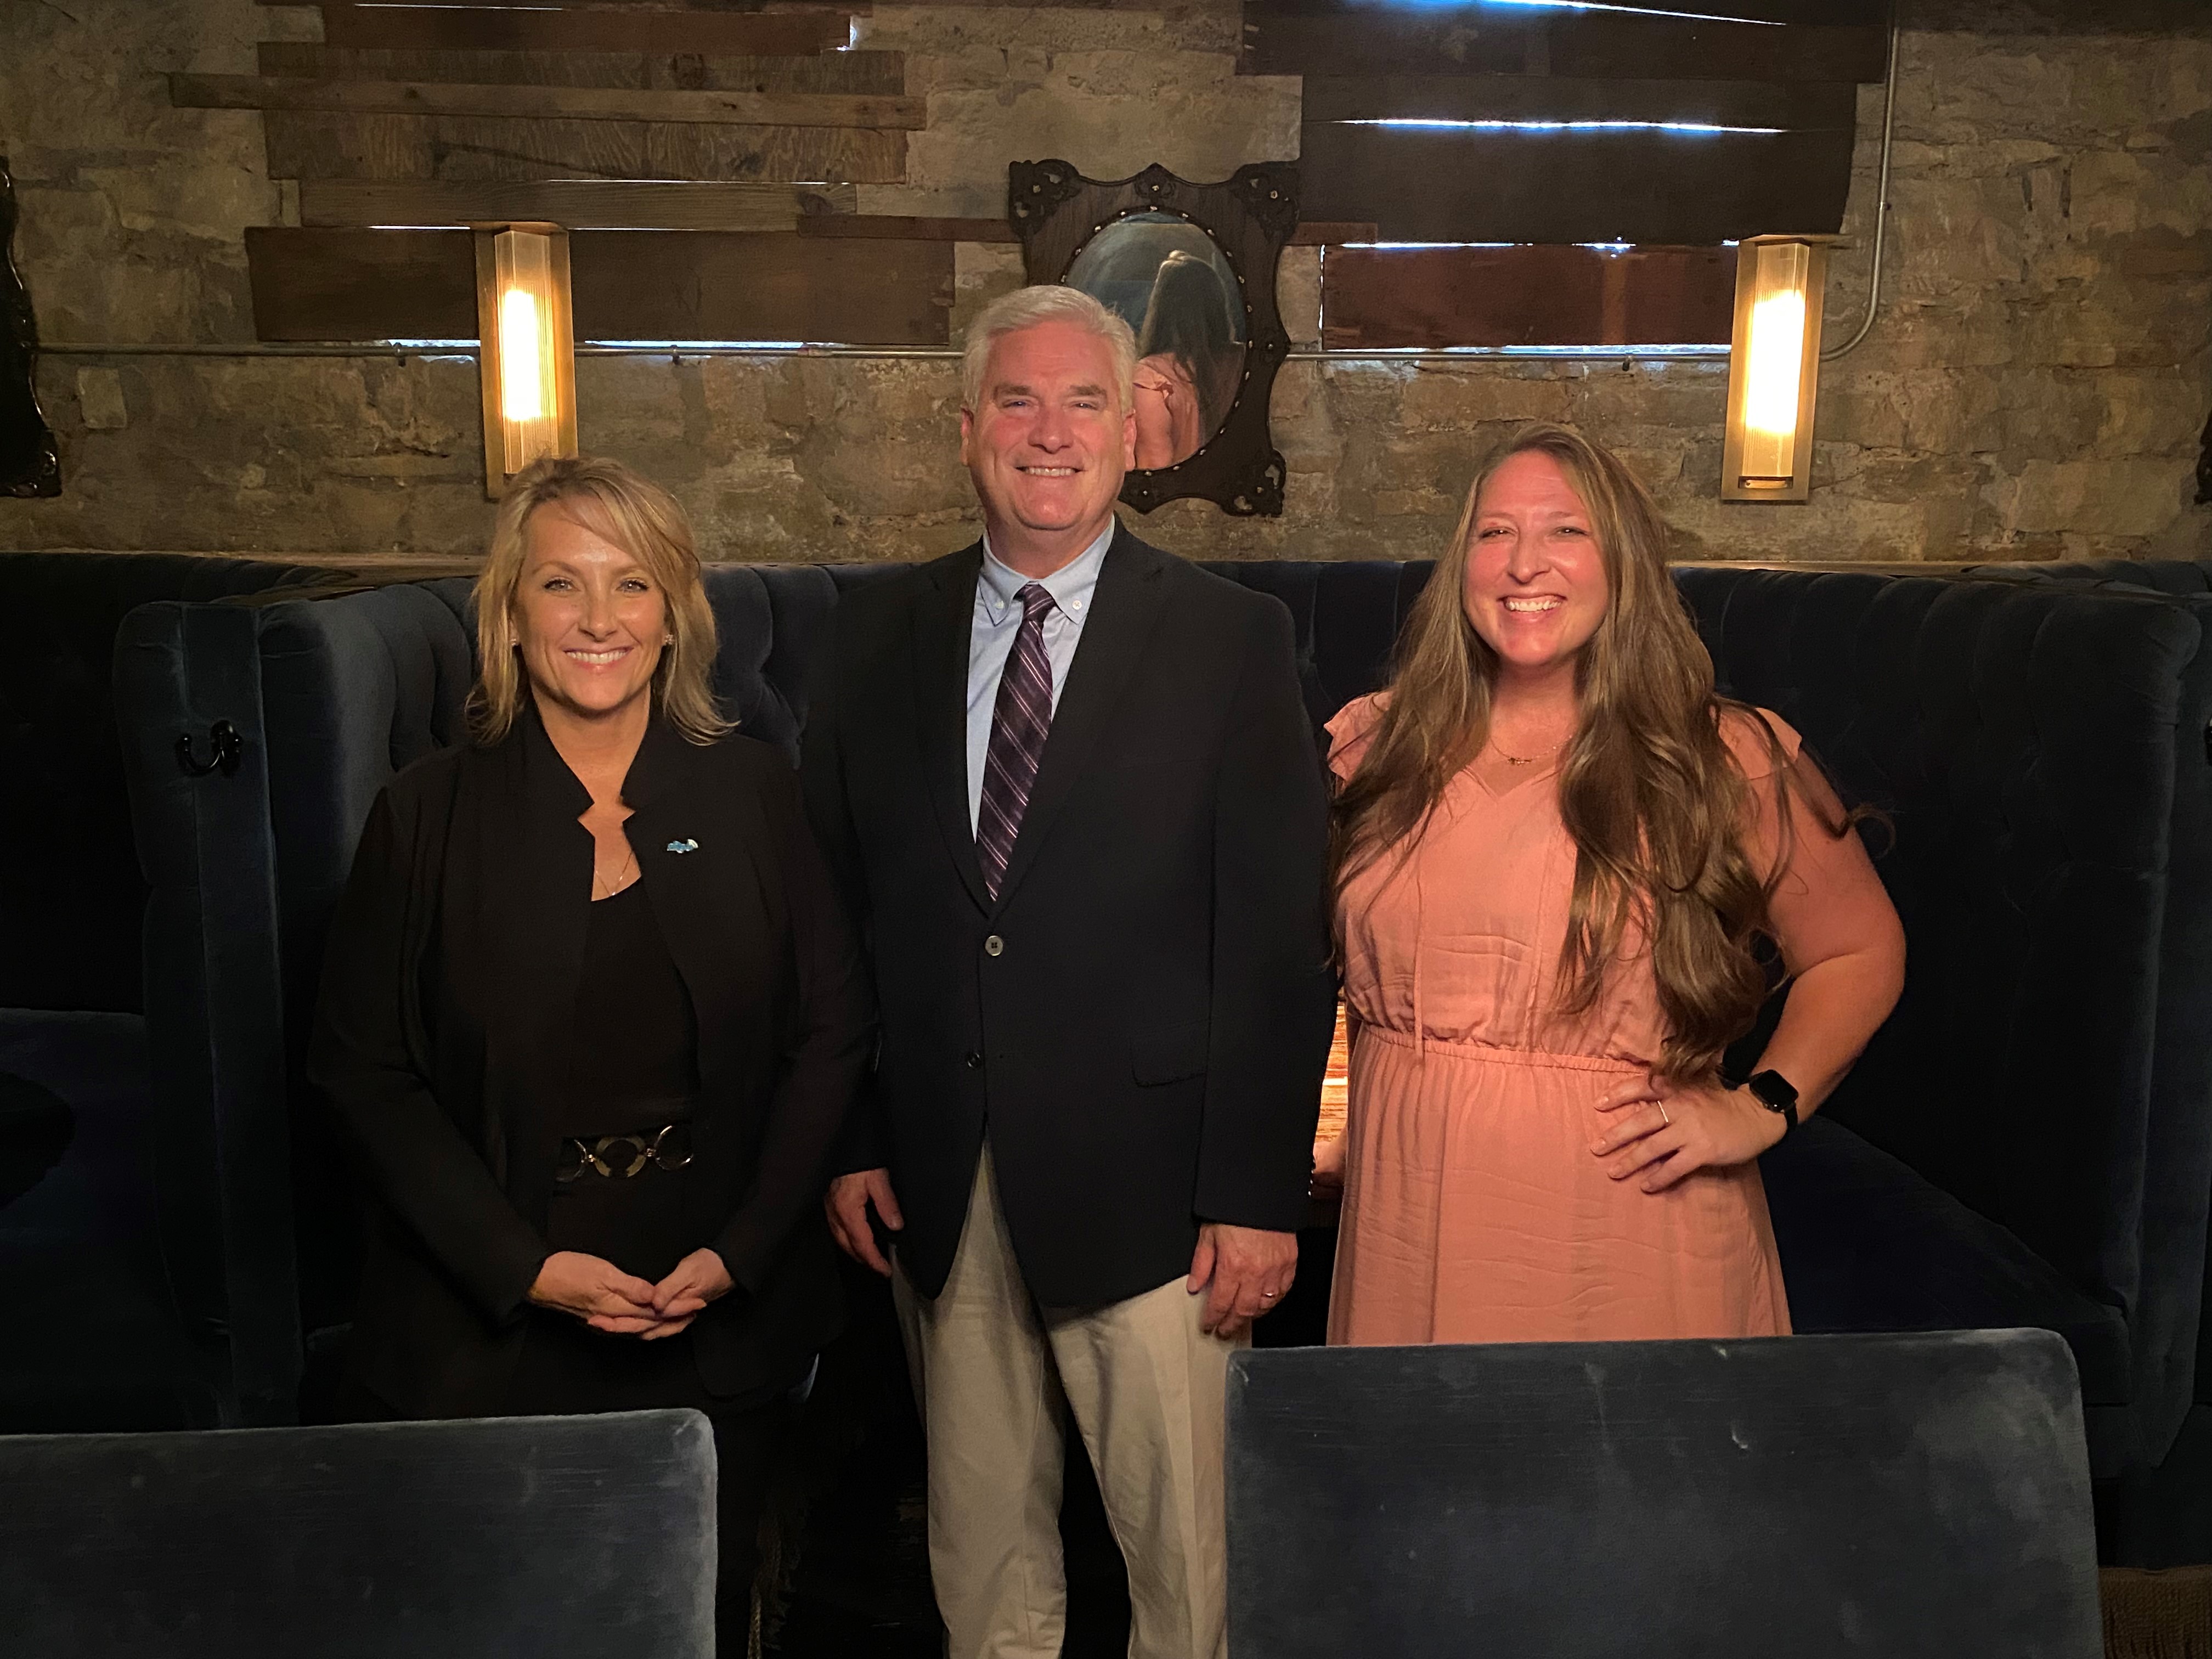 Together with Minnesota Broadcasters Association President and CEO Wendy Paulson, NABPAC co-hosted an industry supported fundraiser for co-chair of the Congressional Broadcasters Caucus and NRCC Chairman Rep. Tom Emmer (MN-06)